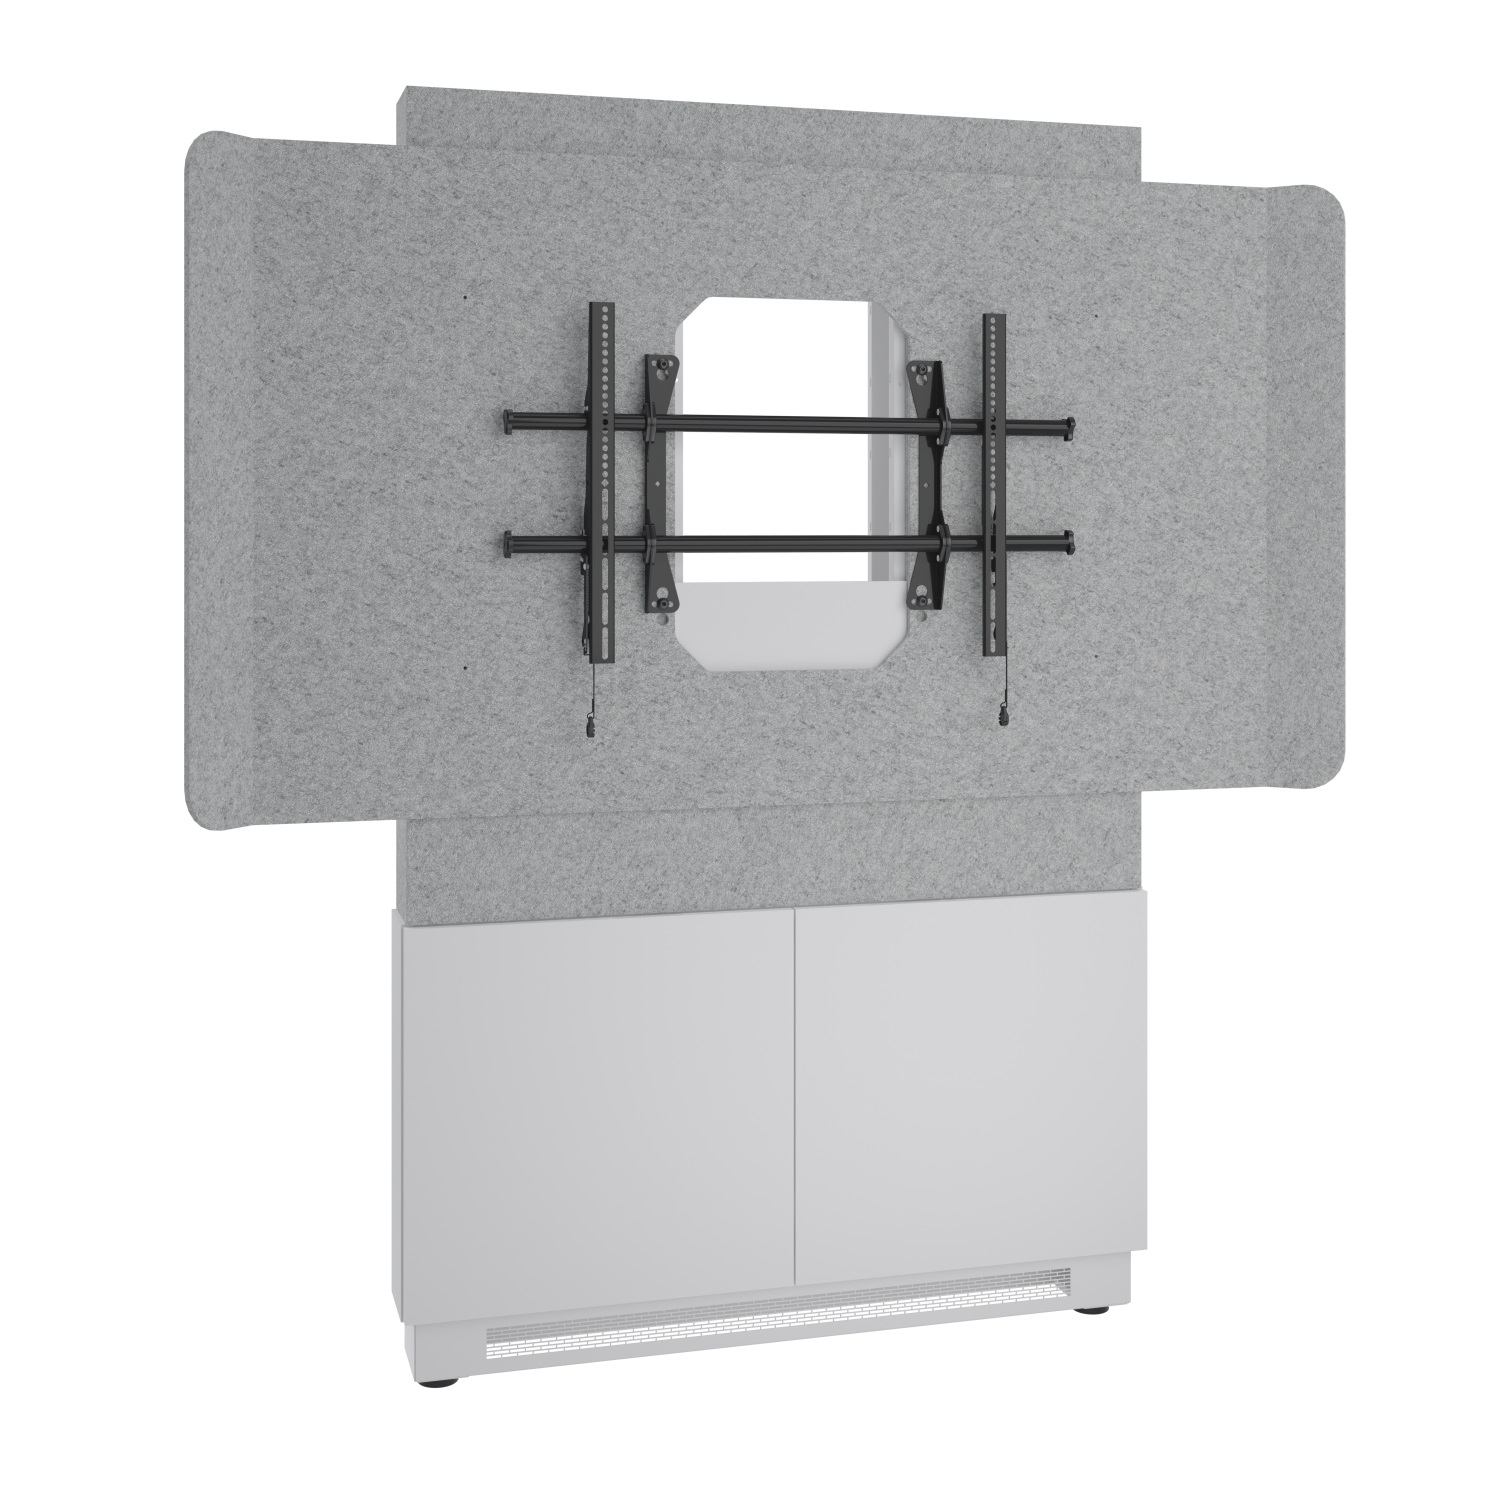 Forum 48 inch display stand